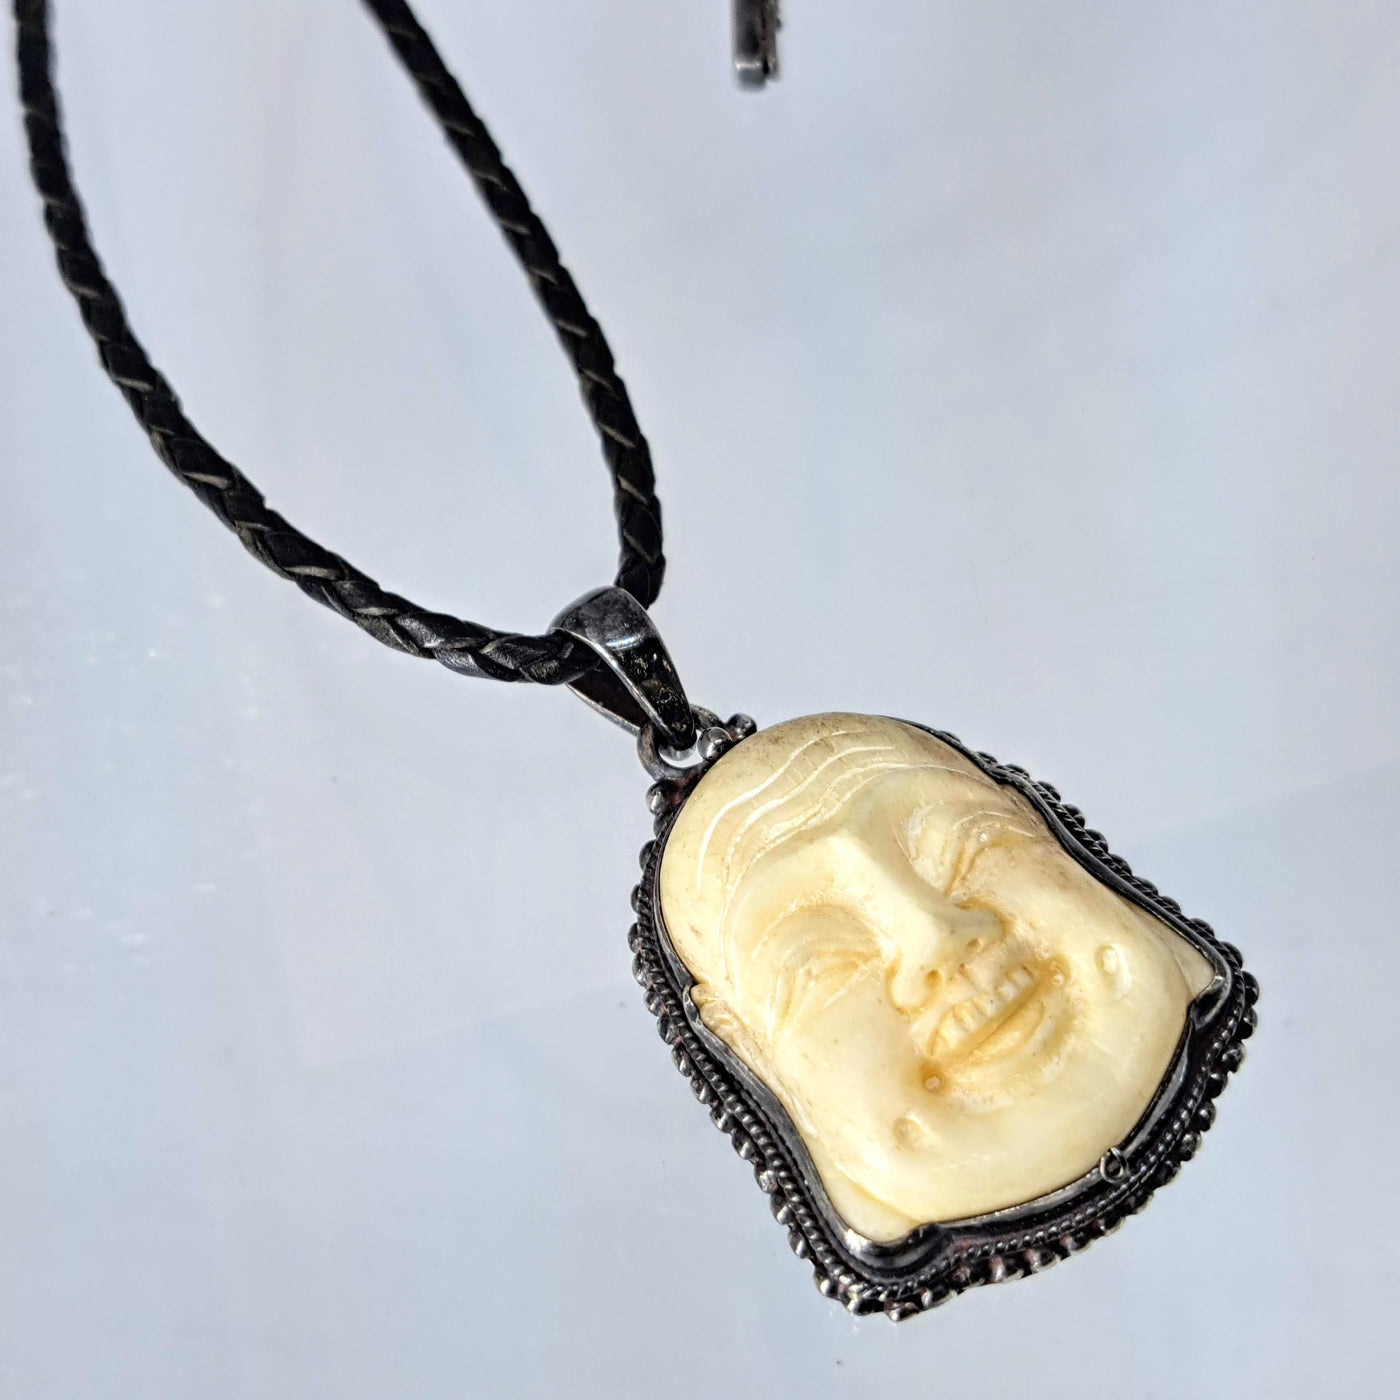 "Smiley Face Buddha" Pendant Necklace - Bone, Leather, Sterling